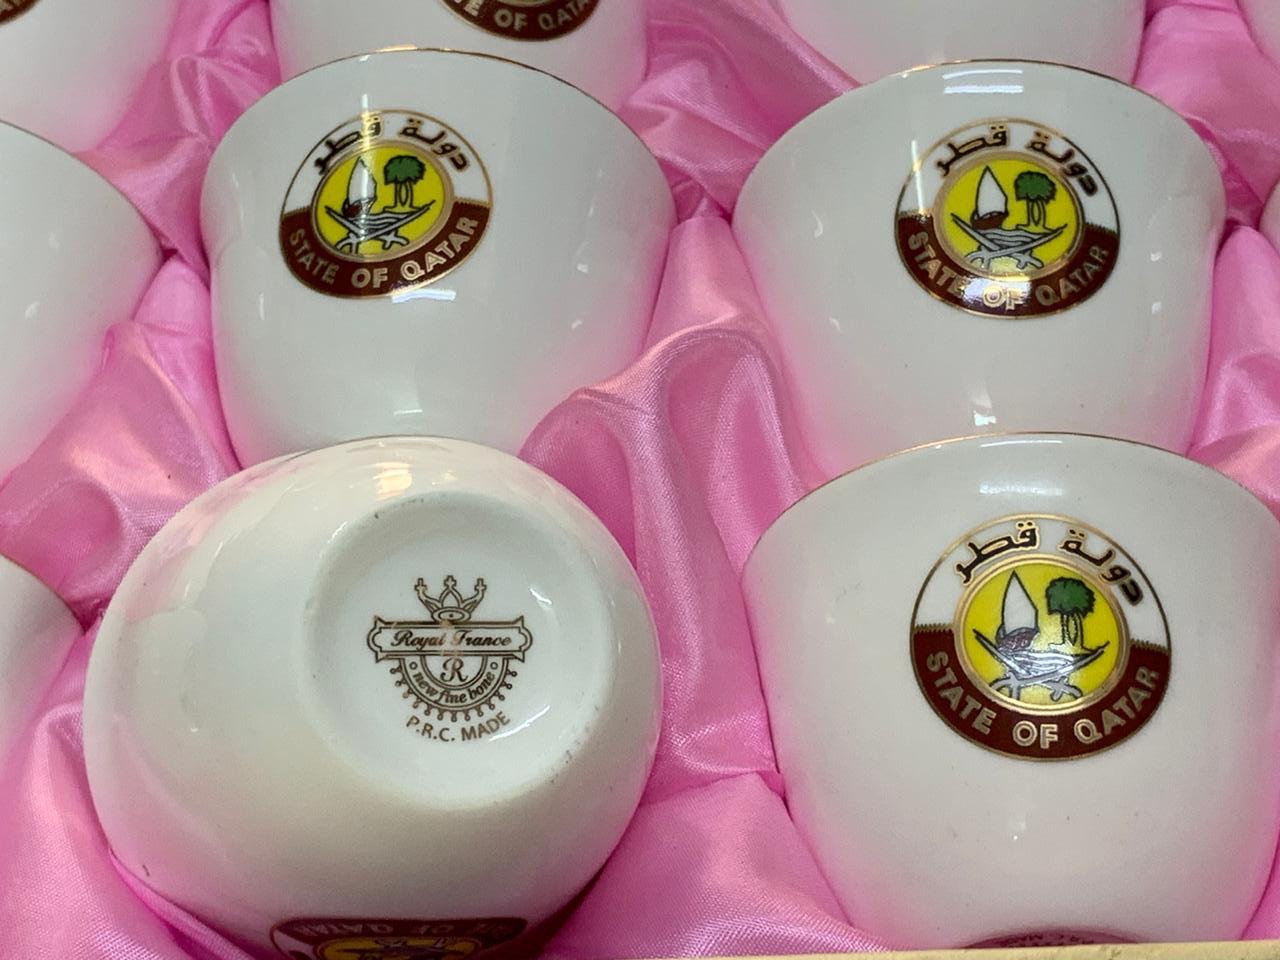 State of Qatar Royal Set of 12 Arabic Coffee Cups with Qatar Coat of Arms in Box